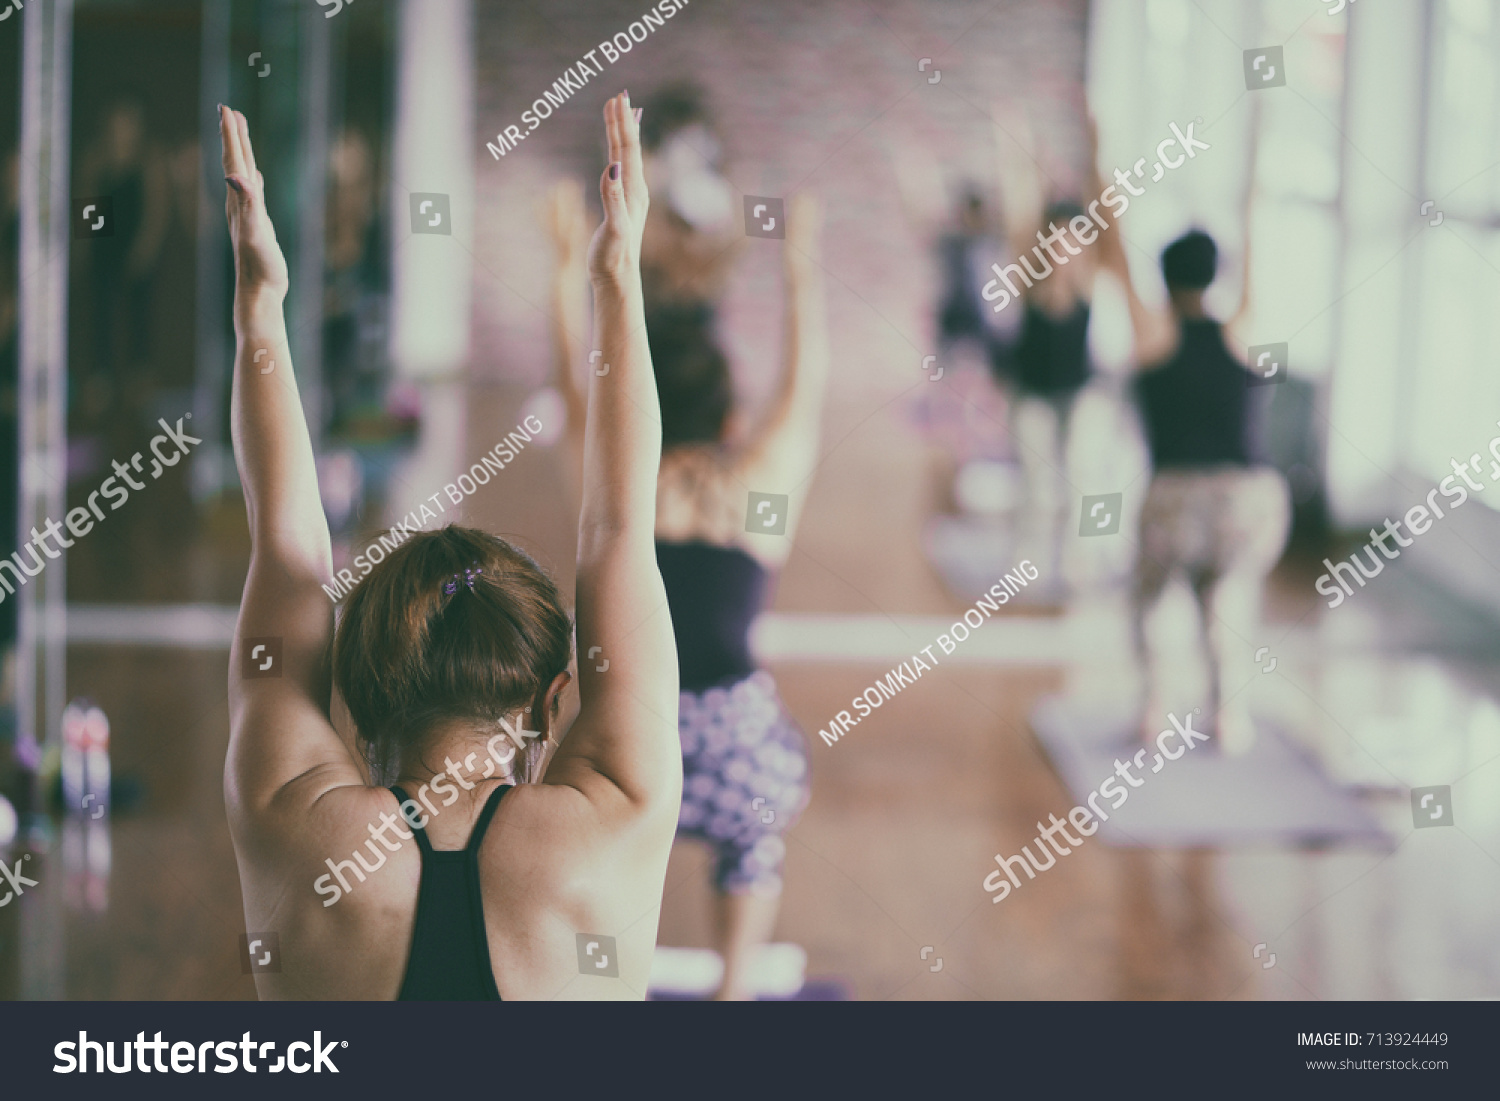 https://www.mcubestudio.com.au/wp-content/uploads/2020/02/stock-photo-group-of-asian-young-woman-stretching-and-practices-practicing-during-their-yoga-class-in-a-gym-713924449.jpg